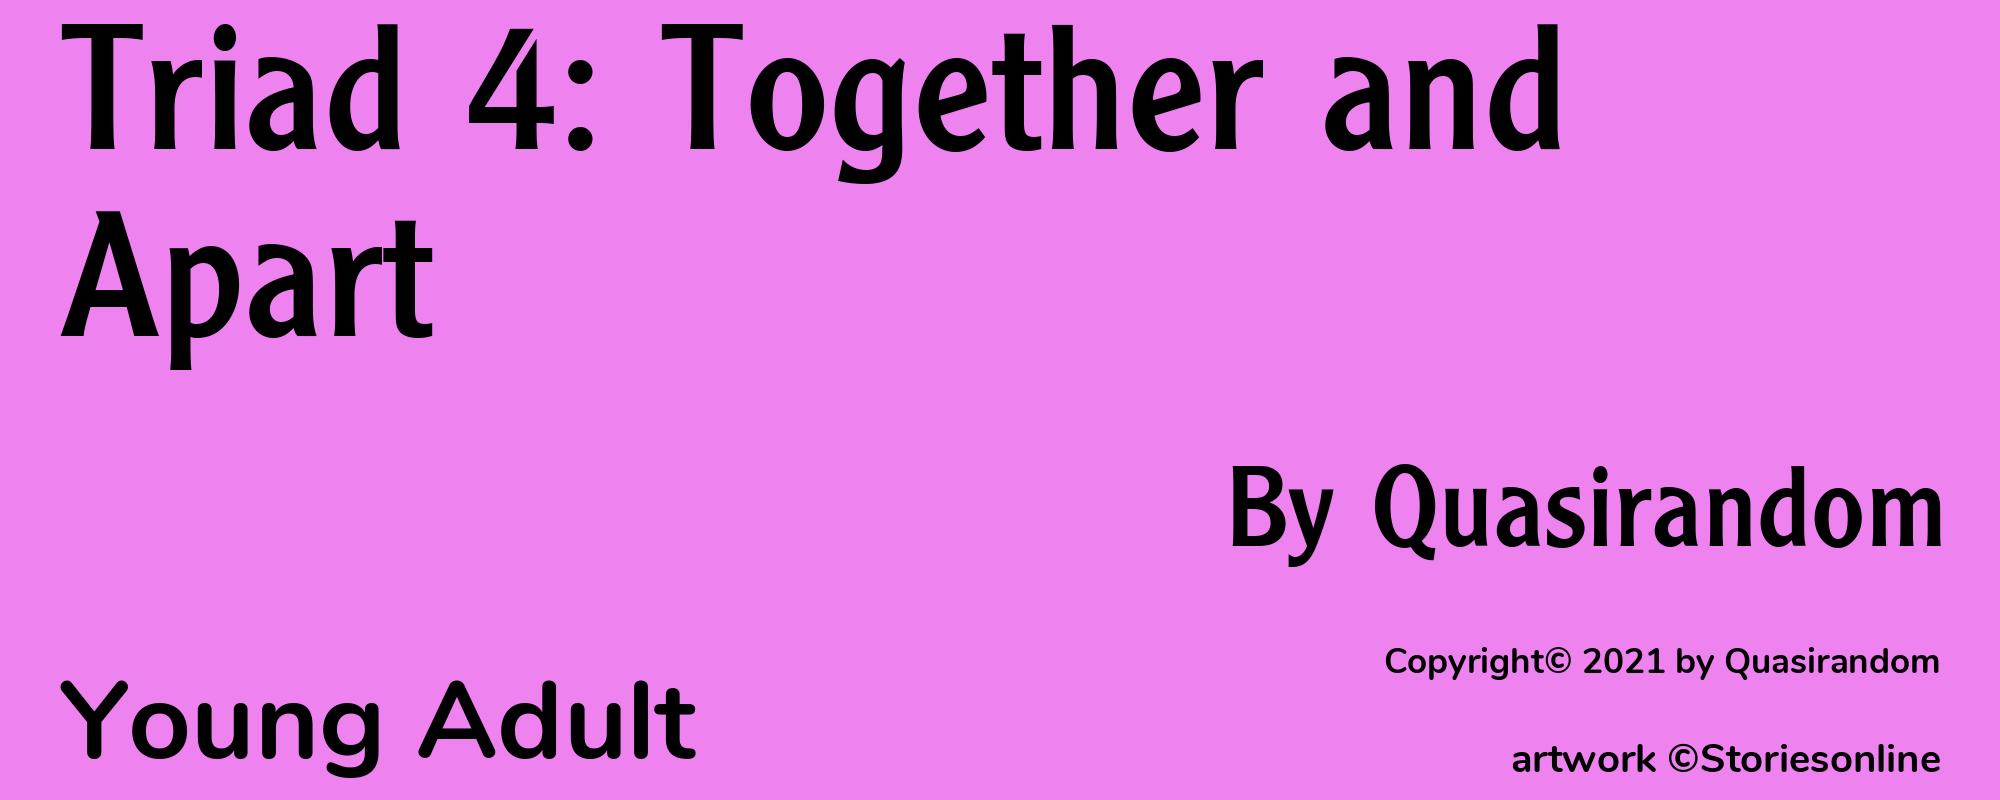 Triad 4: Together and Apart - Cover